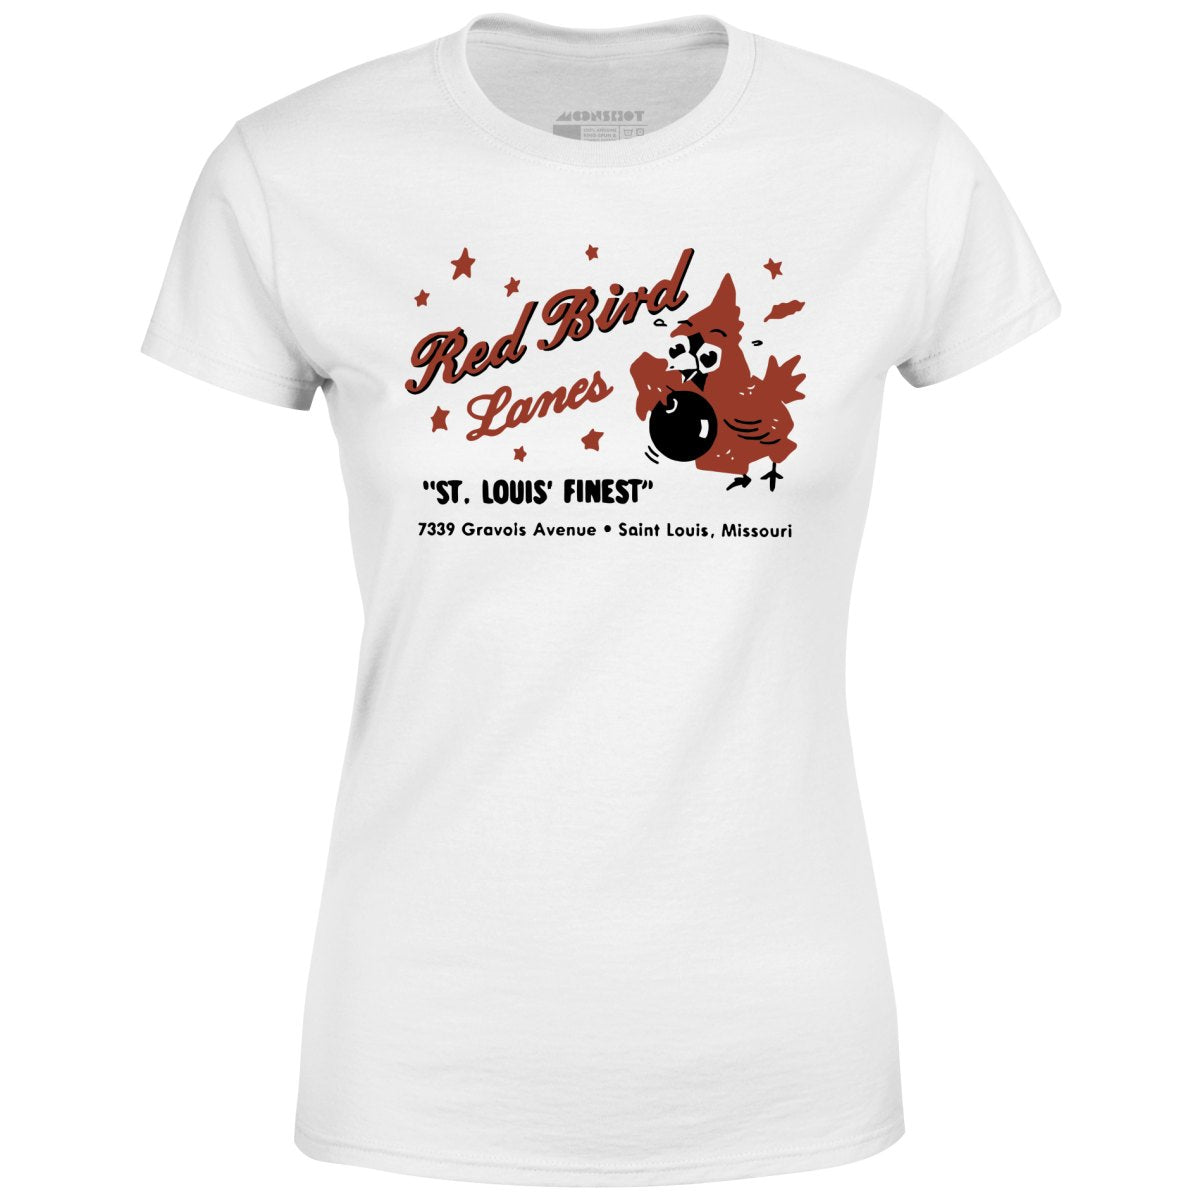 Red Bird Lanes v1 - St. Louis, MO - Vintage Bowling Alley - Women's T-Shirt